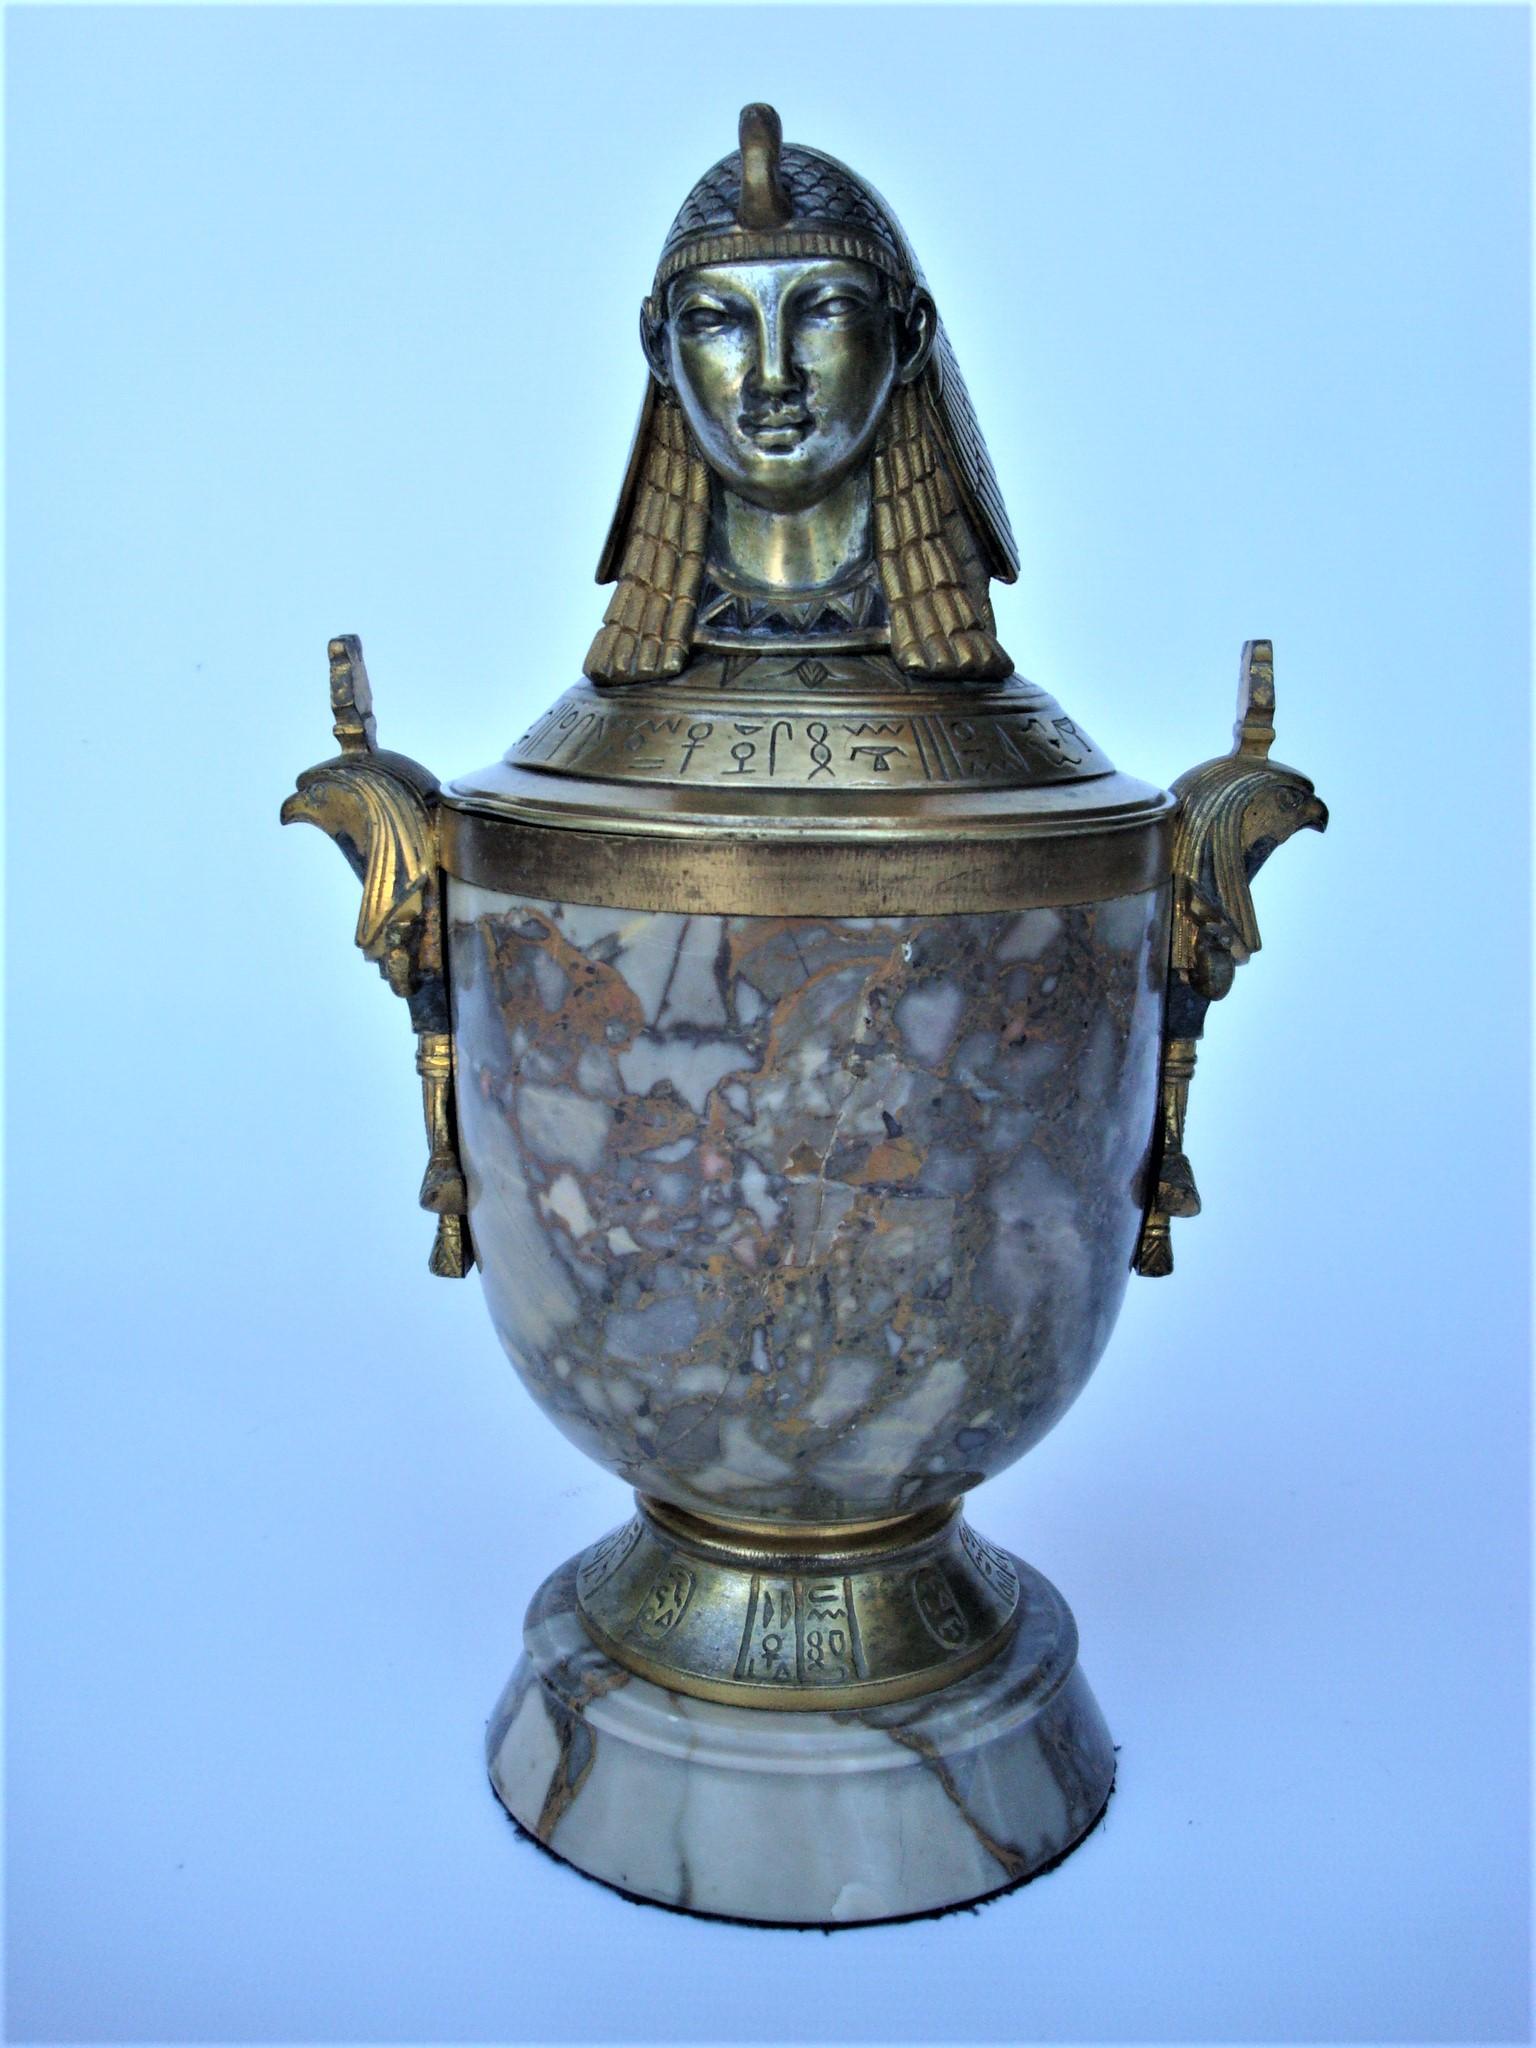 Art Deco Egyptian Revival bronze & marble urn with lid
Egyptian revival lidded bronze and marble urn. Features the bust of a sphinx at the top of the lid.
Marble urn with bronze Egyptian woman accents.